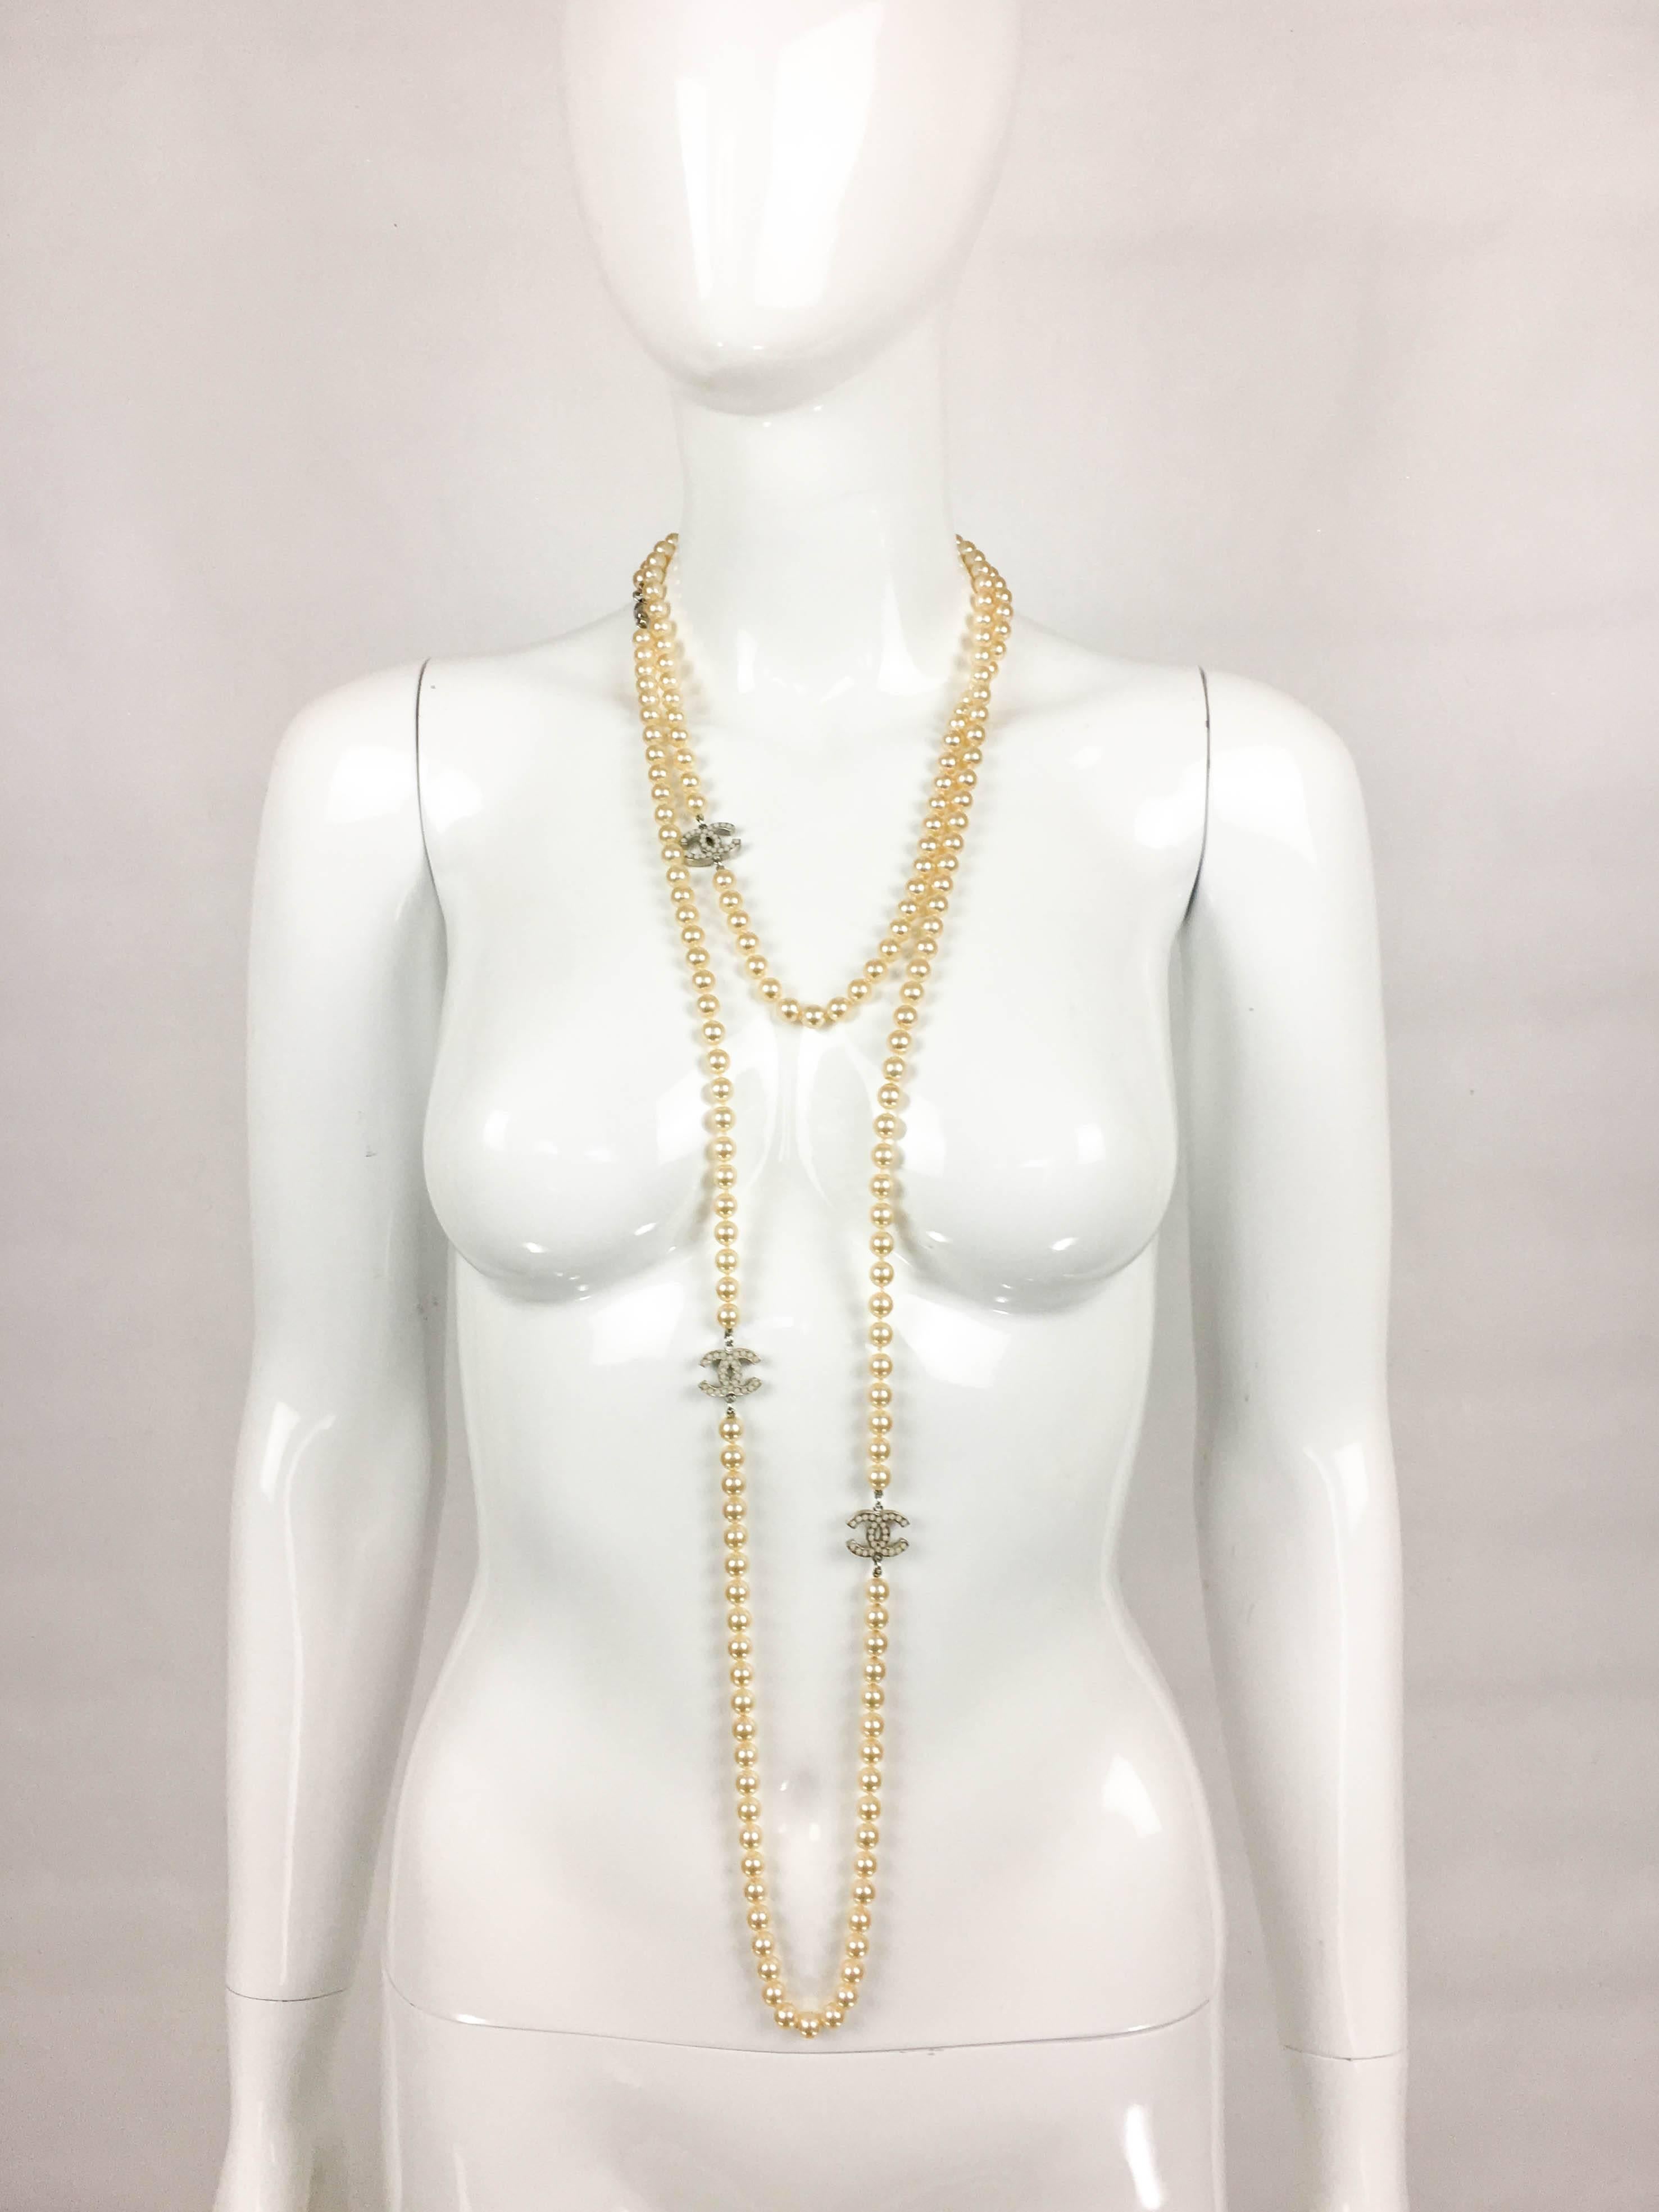 2008 Chanel Long Pearl Sautoir Necklace with 3 Inset Pearl 'CC' Logos 1